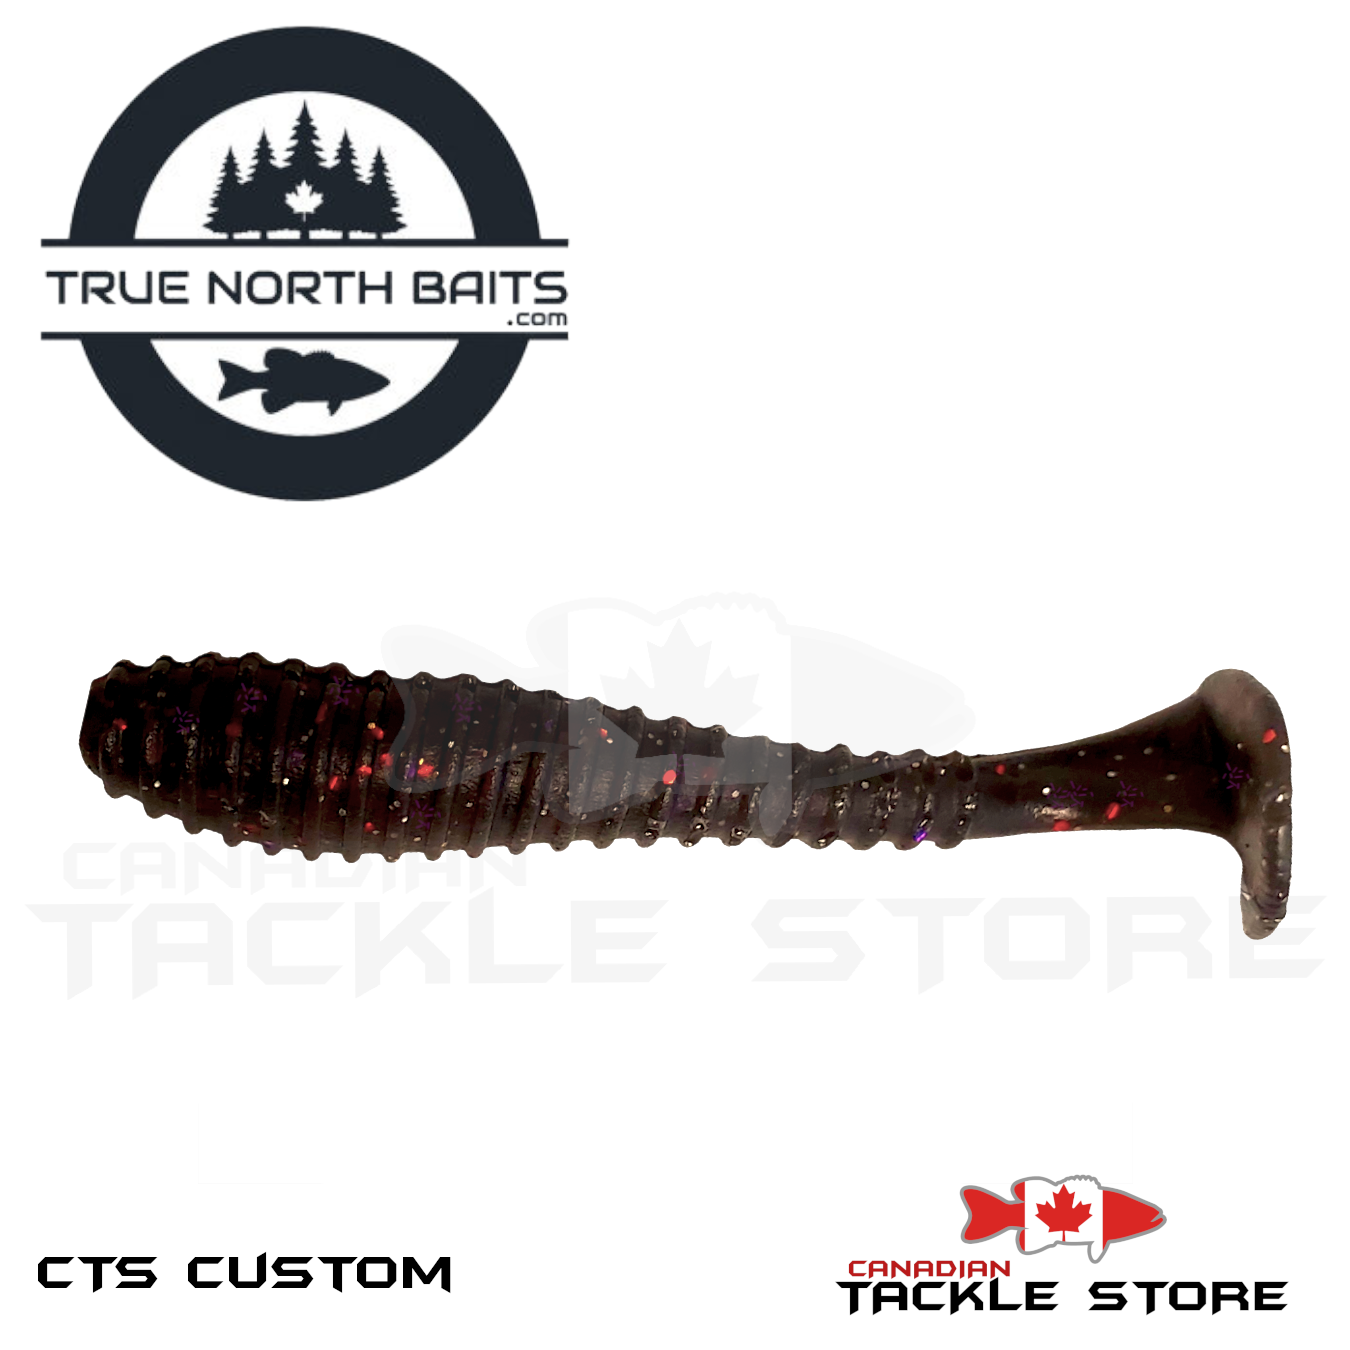 True North Baits – Canadian Tackle Store